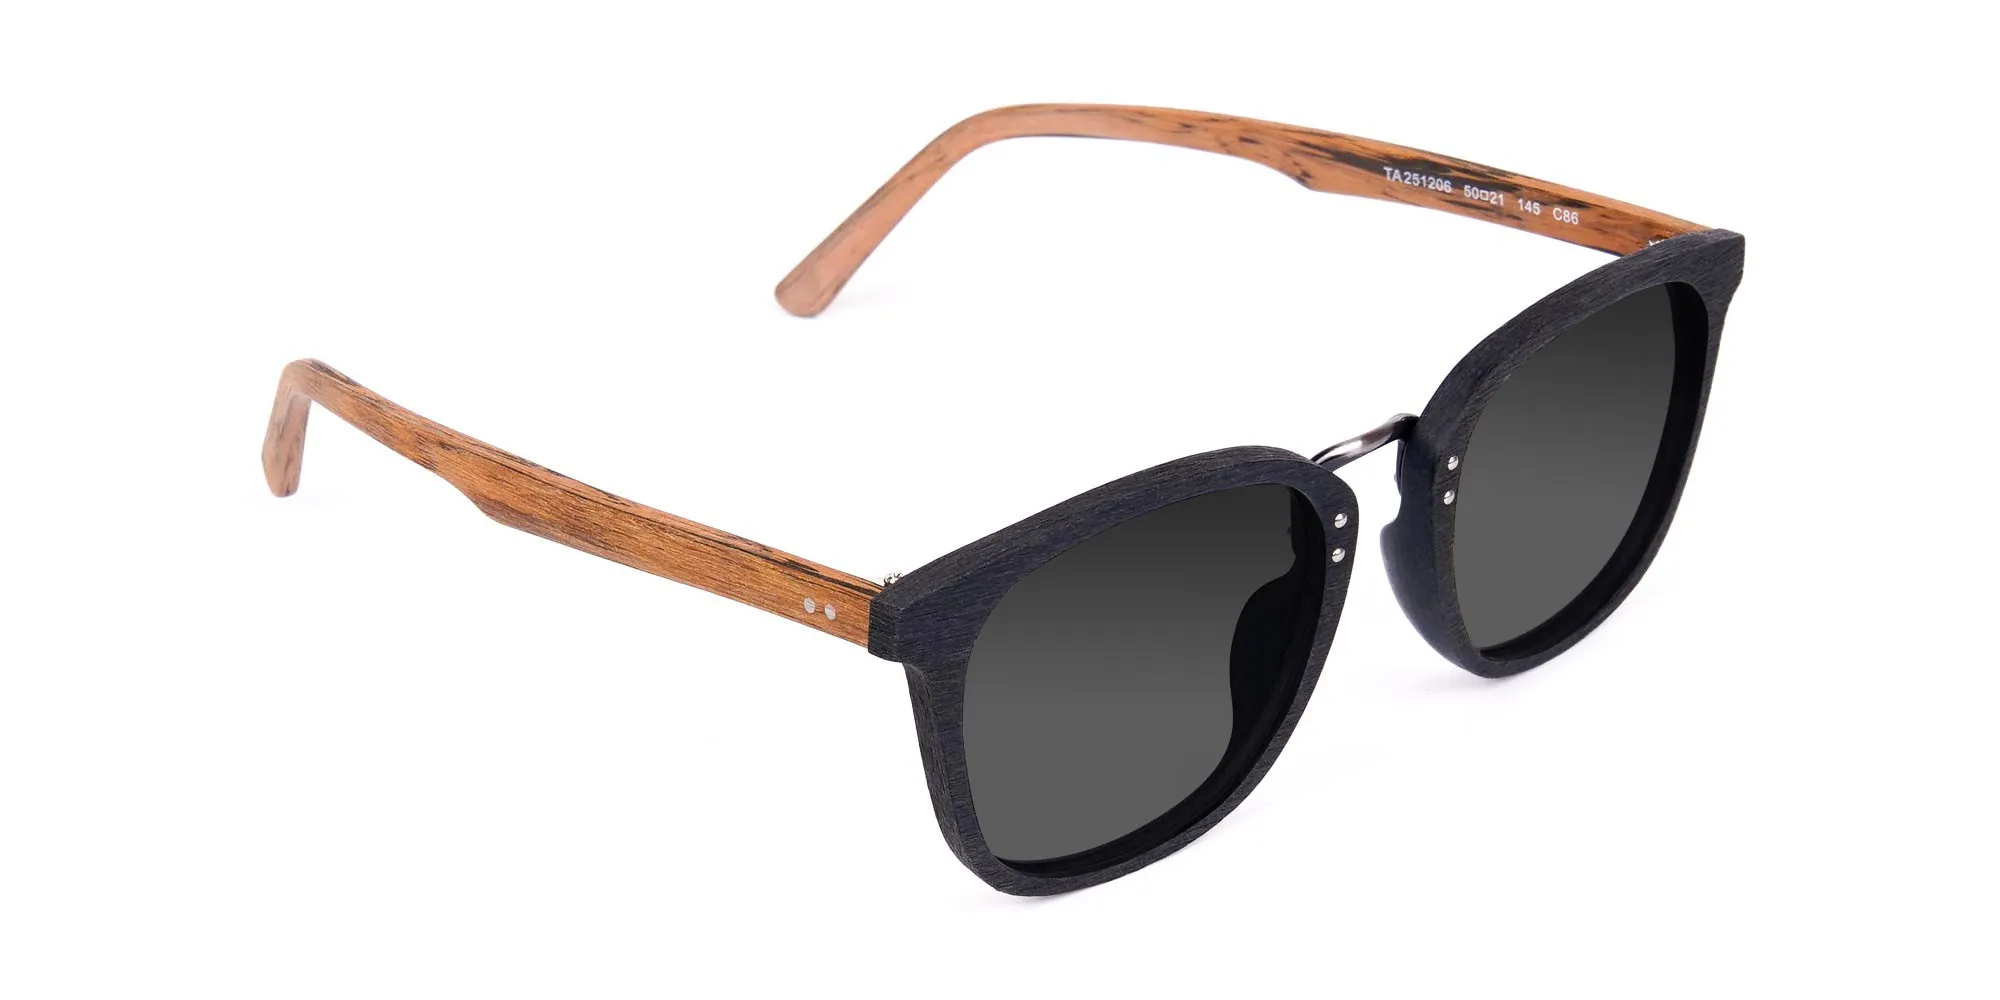 Wood-Black-Frame-Square-Sunglasses-with-Grey-Tint-2